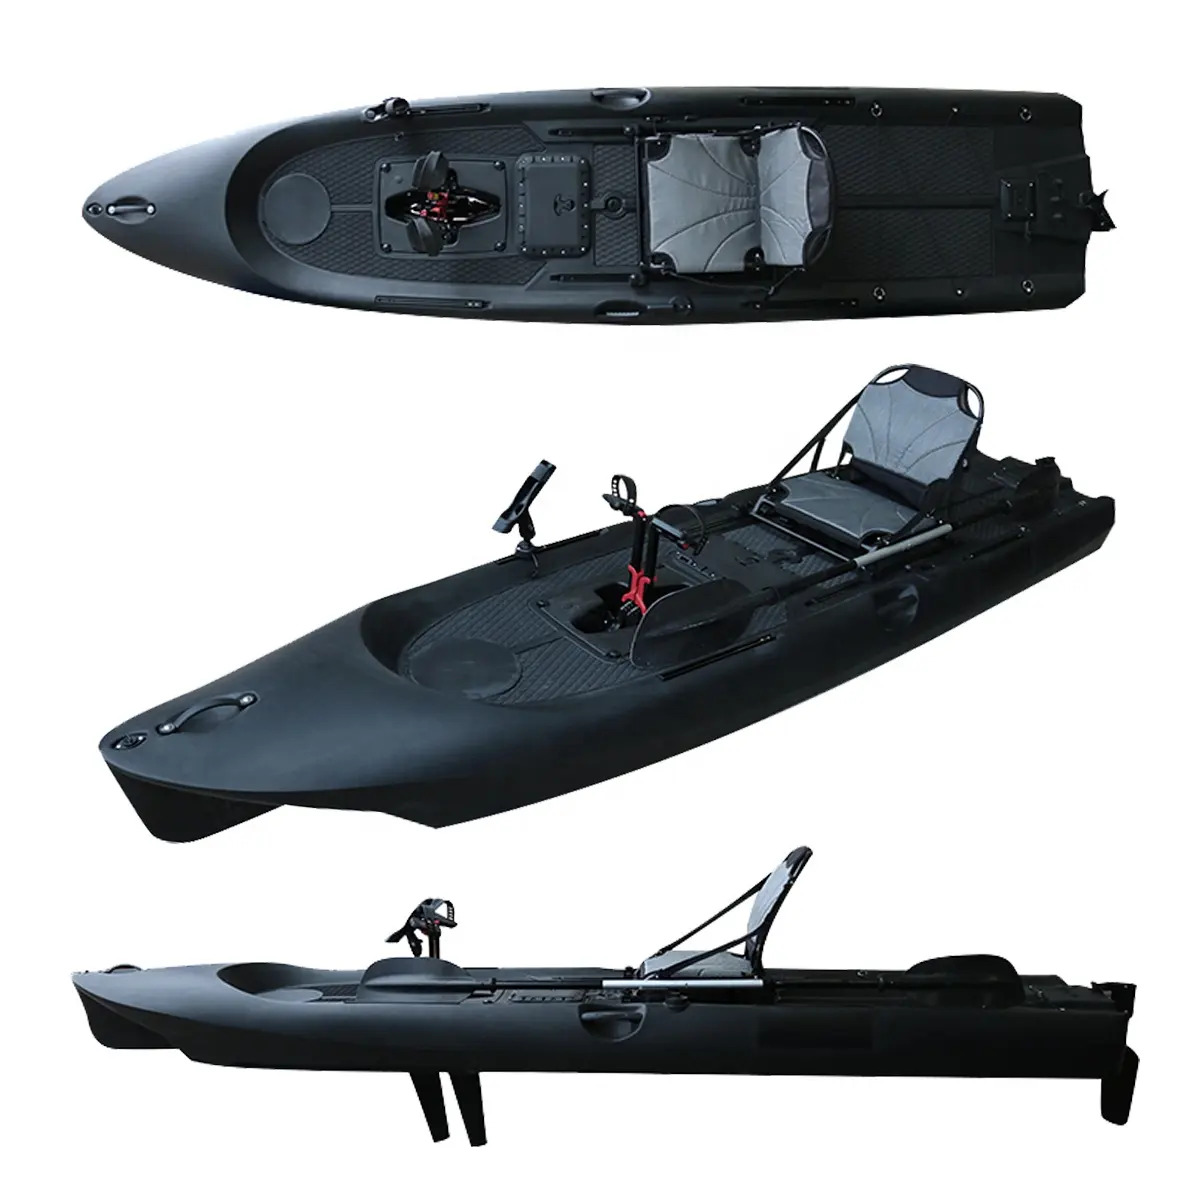 Pedal SUP Kayak Canoe Small Canoe Motor Fishing Net Ningbo 38 Kano Plastic New Style 1 Person Sit on Top Fishing Support SUP PRO